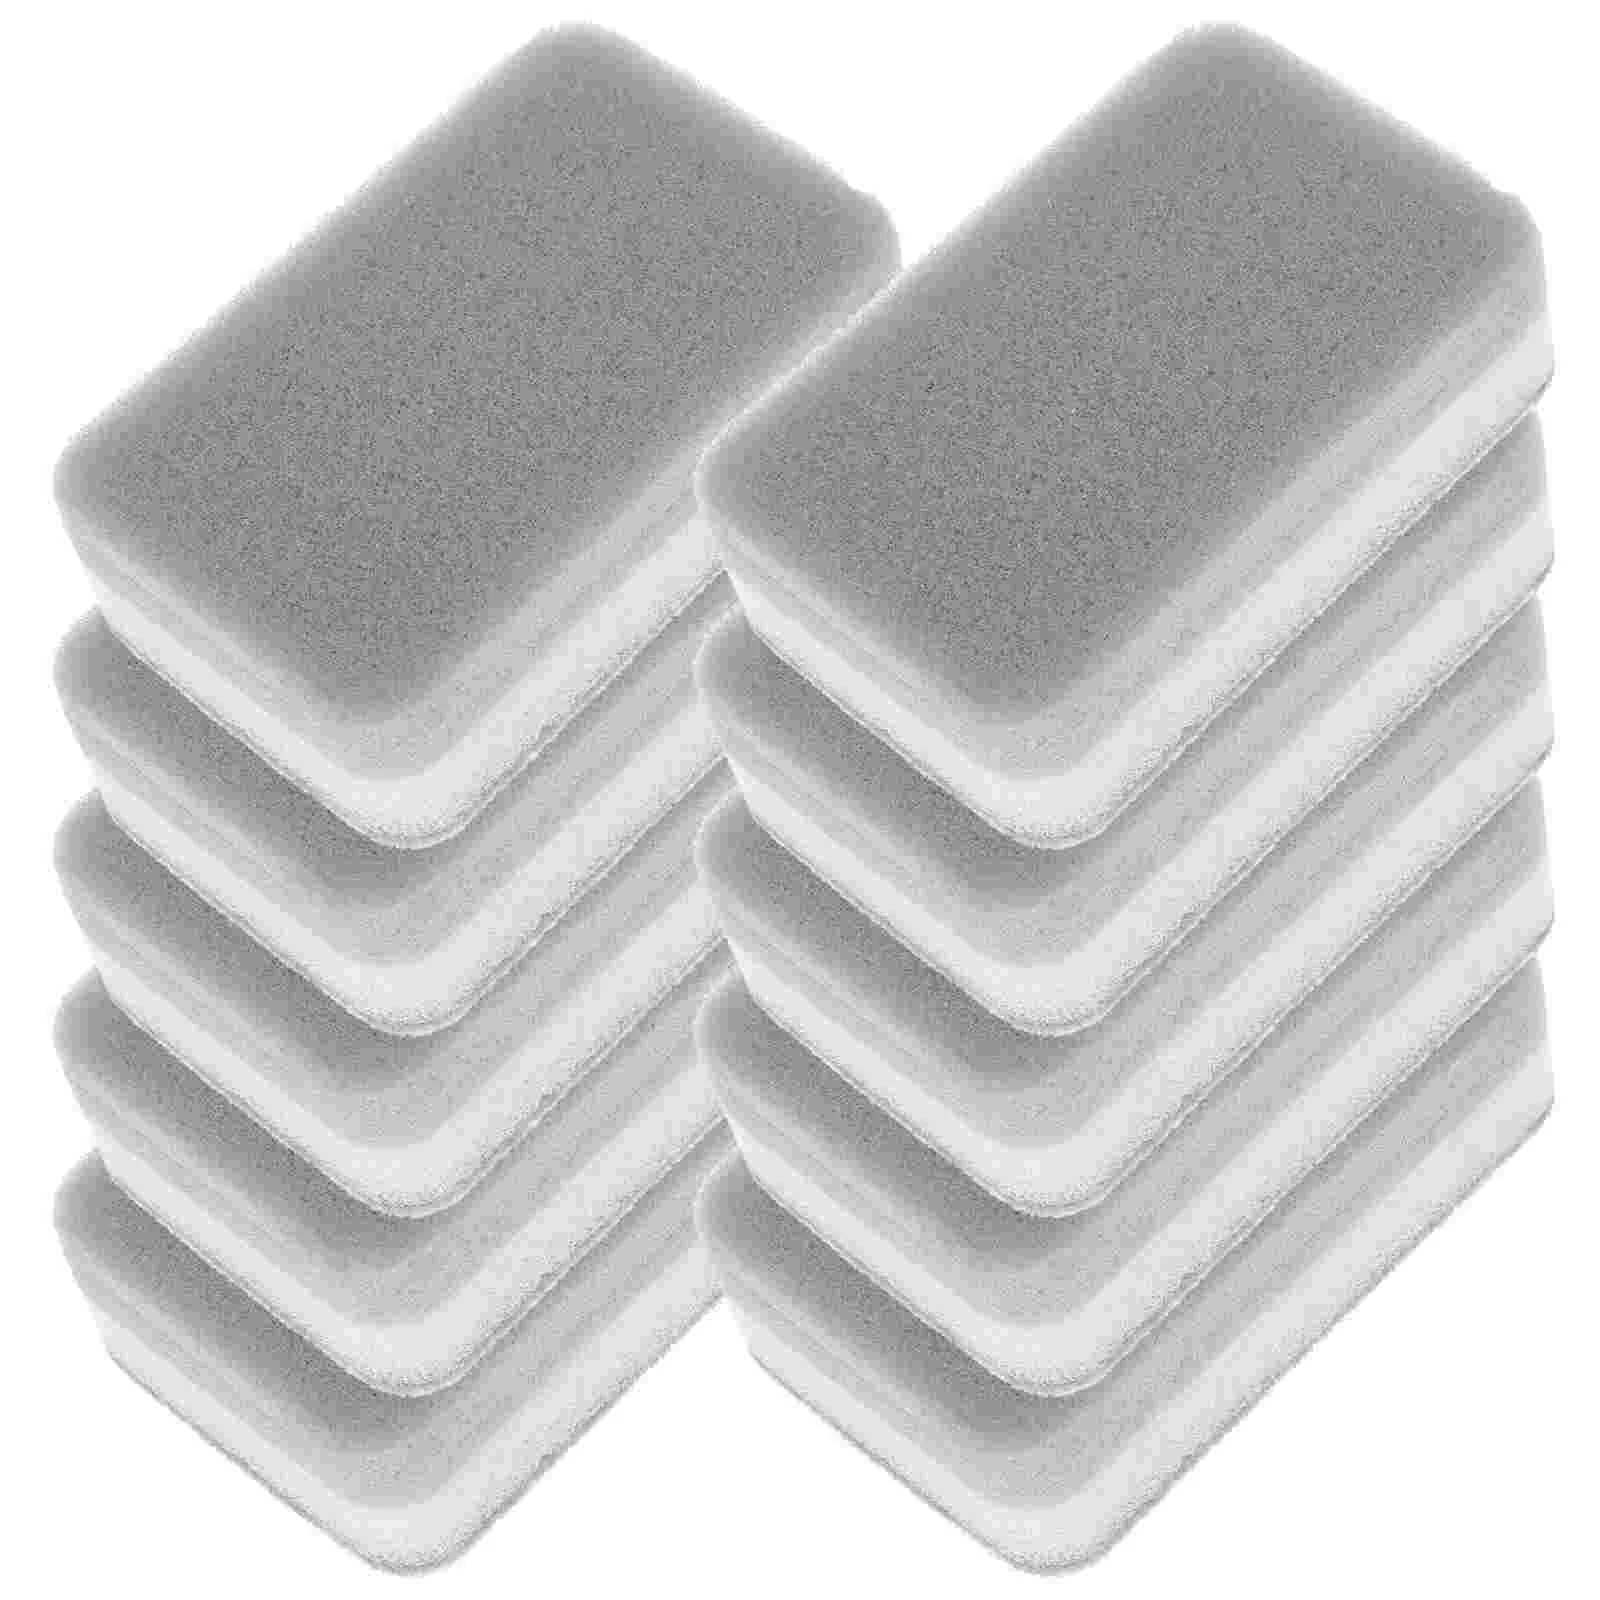 

10 Pcs Cleaning Sponges Dishwashing Microfiber Kitchen Natural Scrubber Anti-scratch Three-Layer Scouring